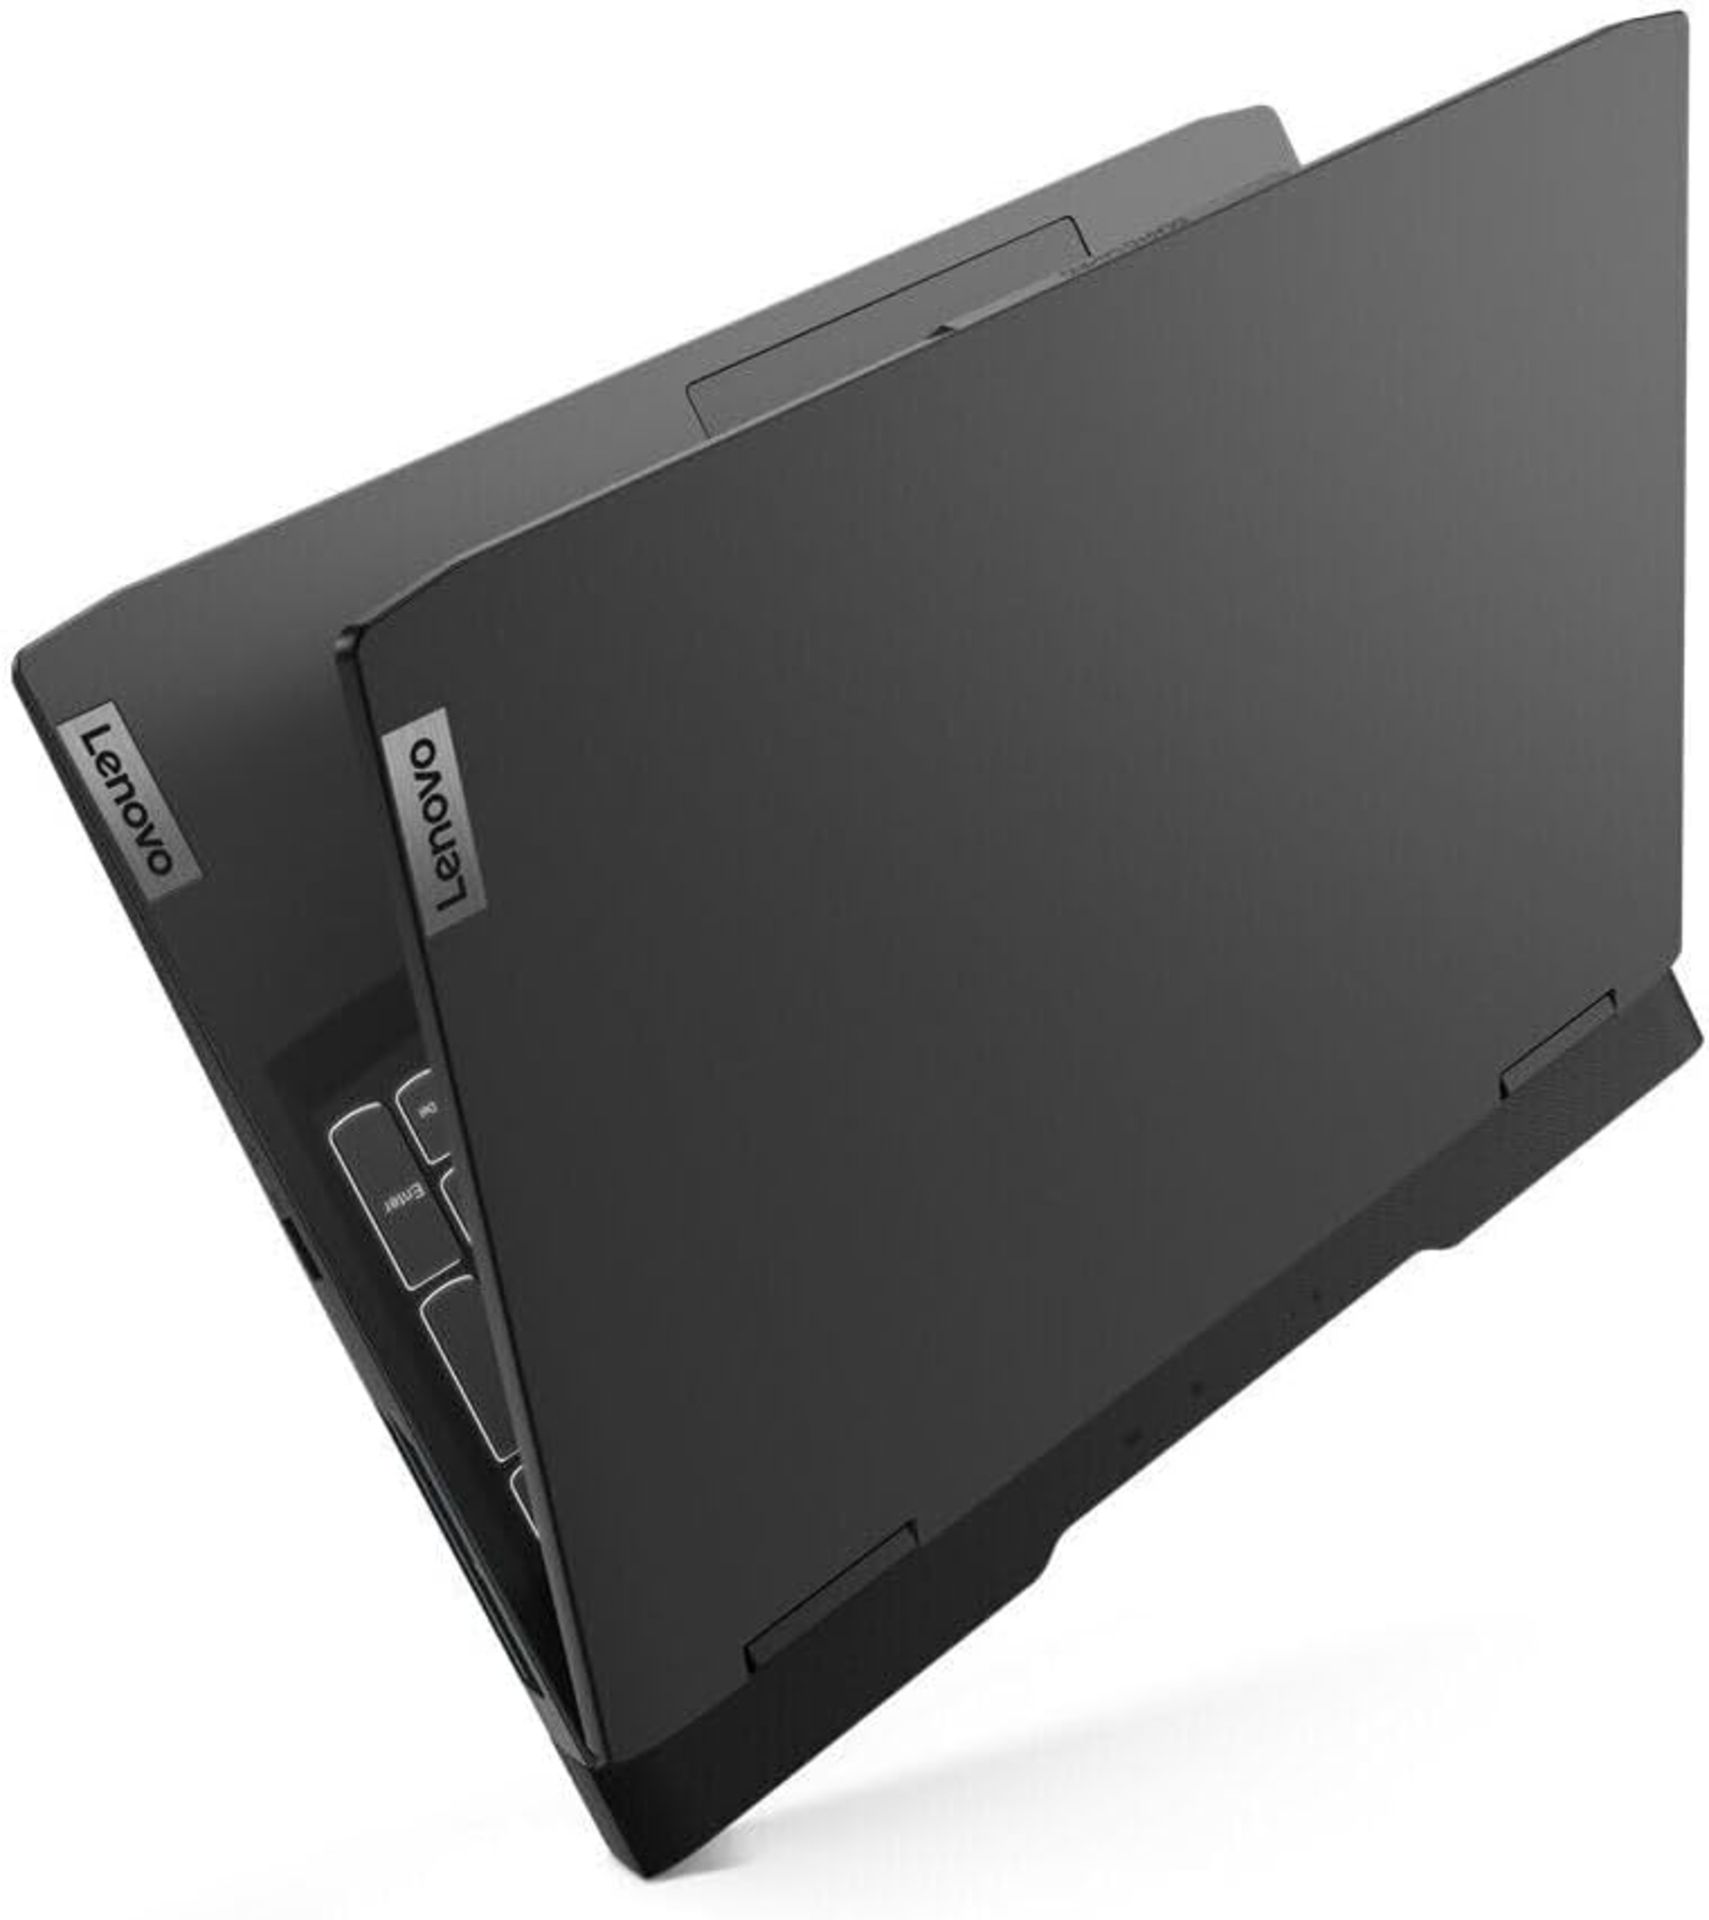 BRAND NEW FACTORY SEALED LENOVO IdeaPad Gaming 3 15ARH7 Laptop. RRP £997.88. Screen: 15.6 Inch - Image 4 of 5